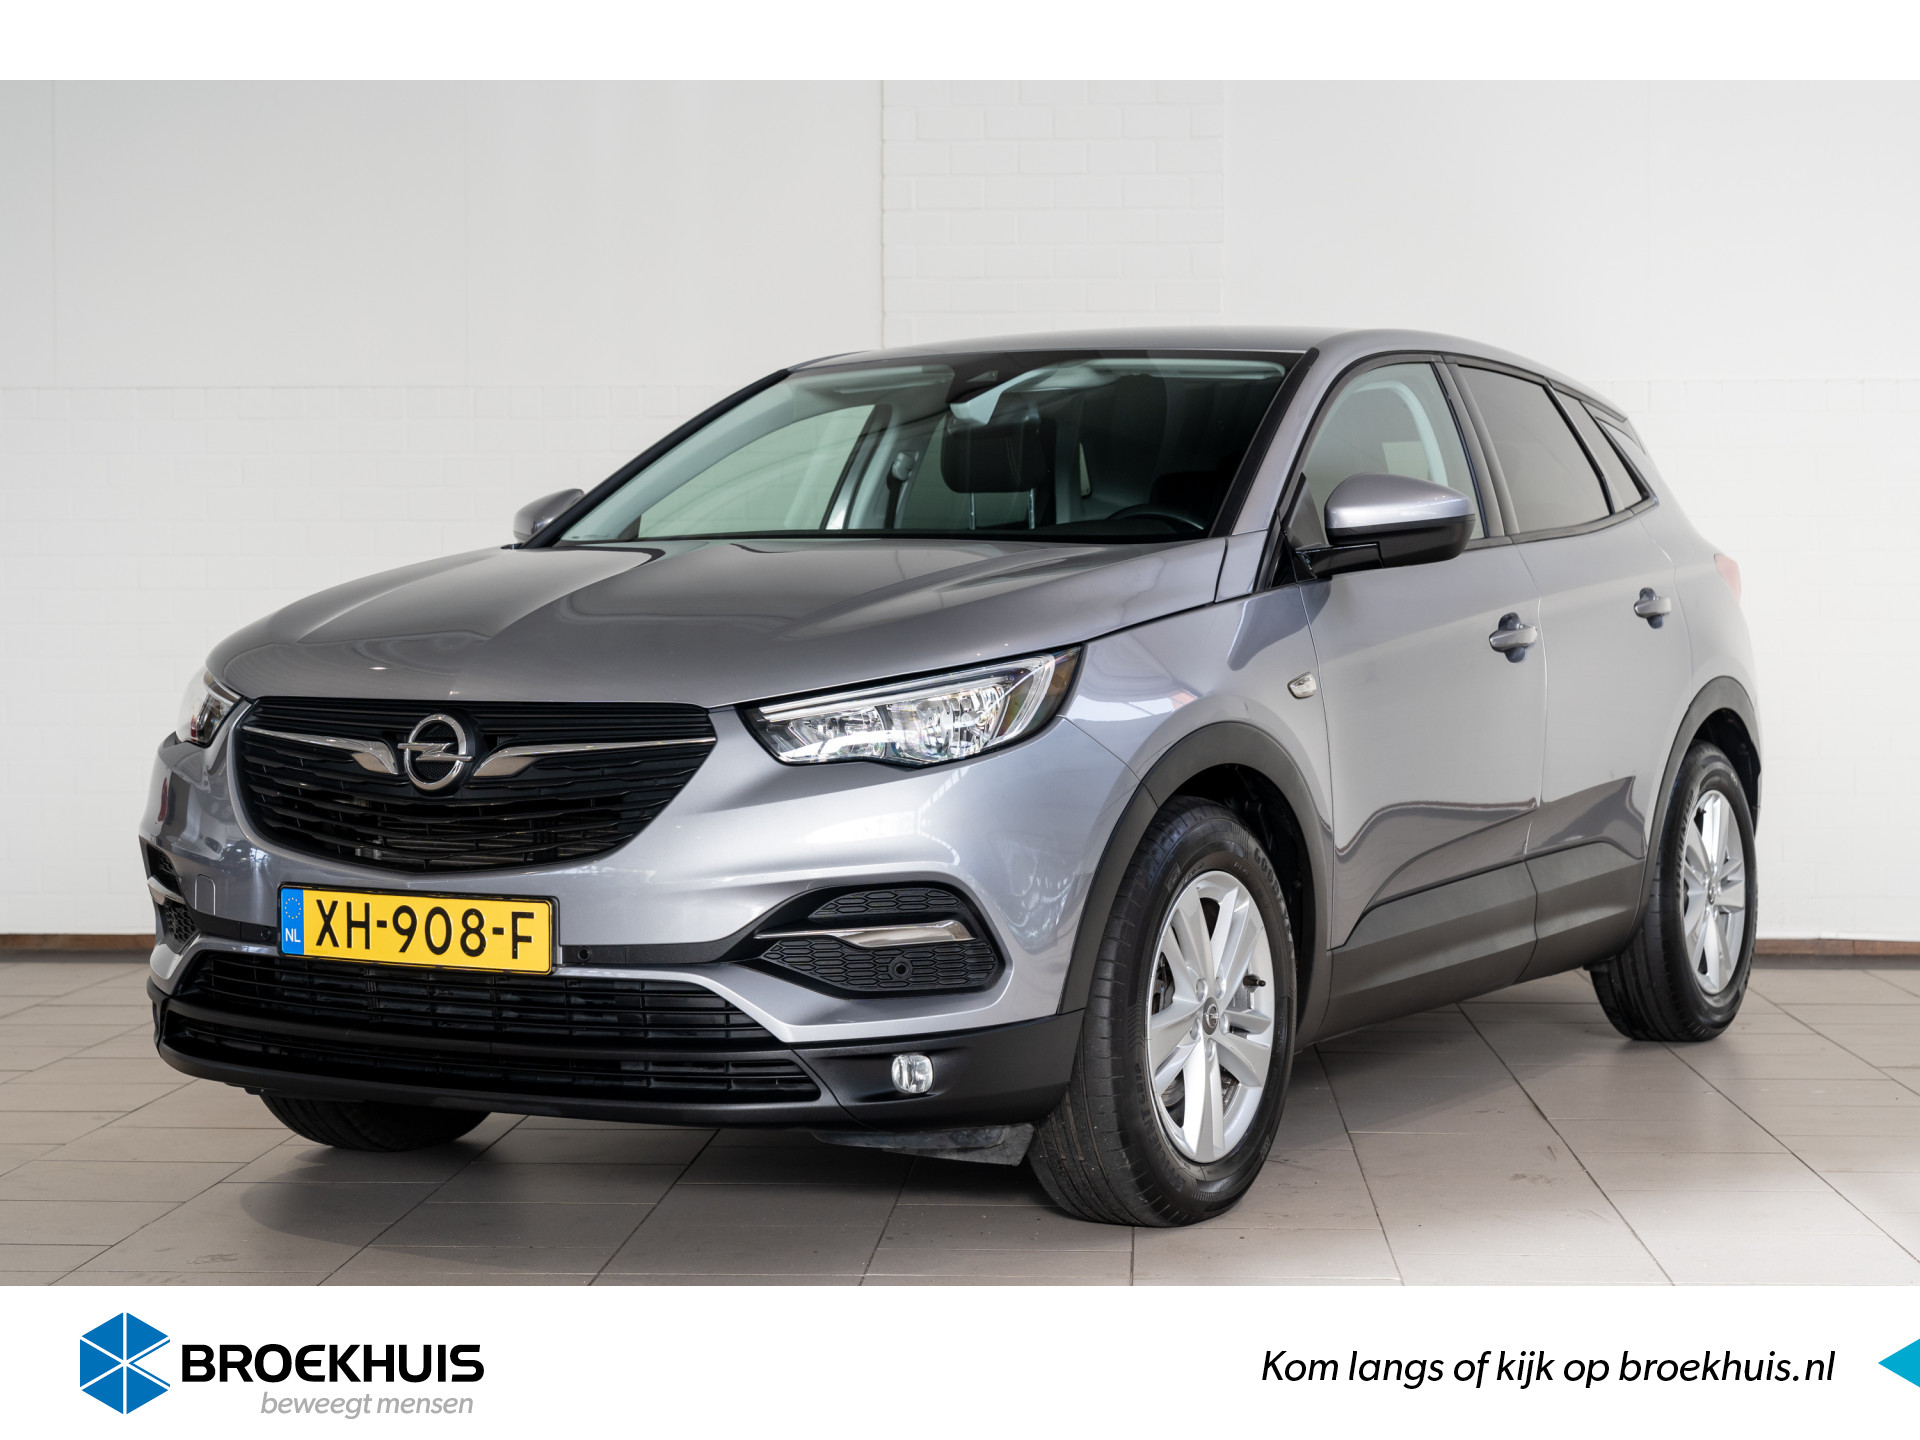 Opel Grandland X 1.2 Turbo Online Edition | Navigatie | Climate Controle | PDC Voor & Achter | Apple Carplay & Android Auto | bij viaBOVAG.nl